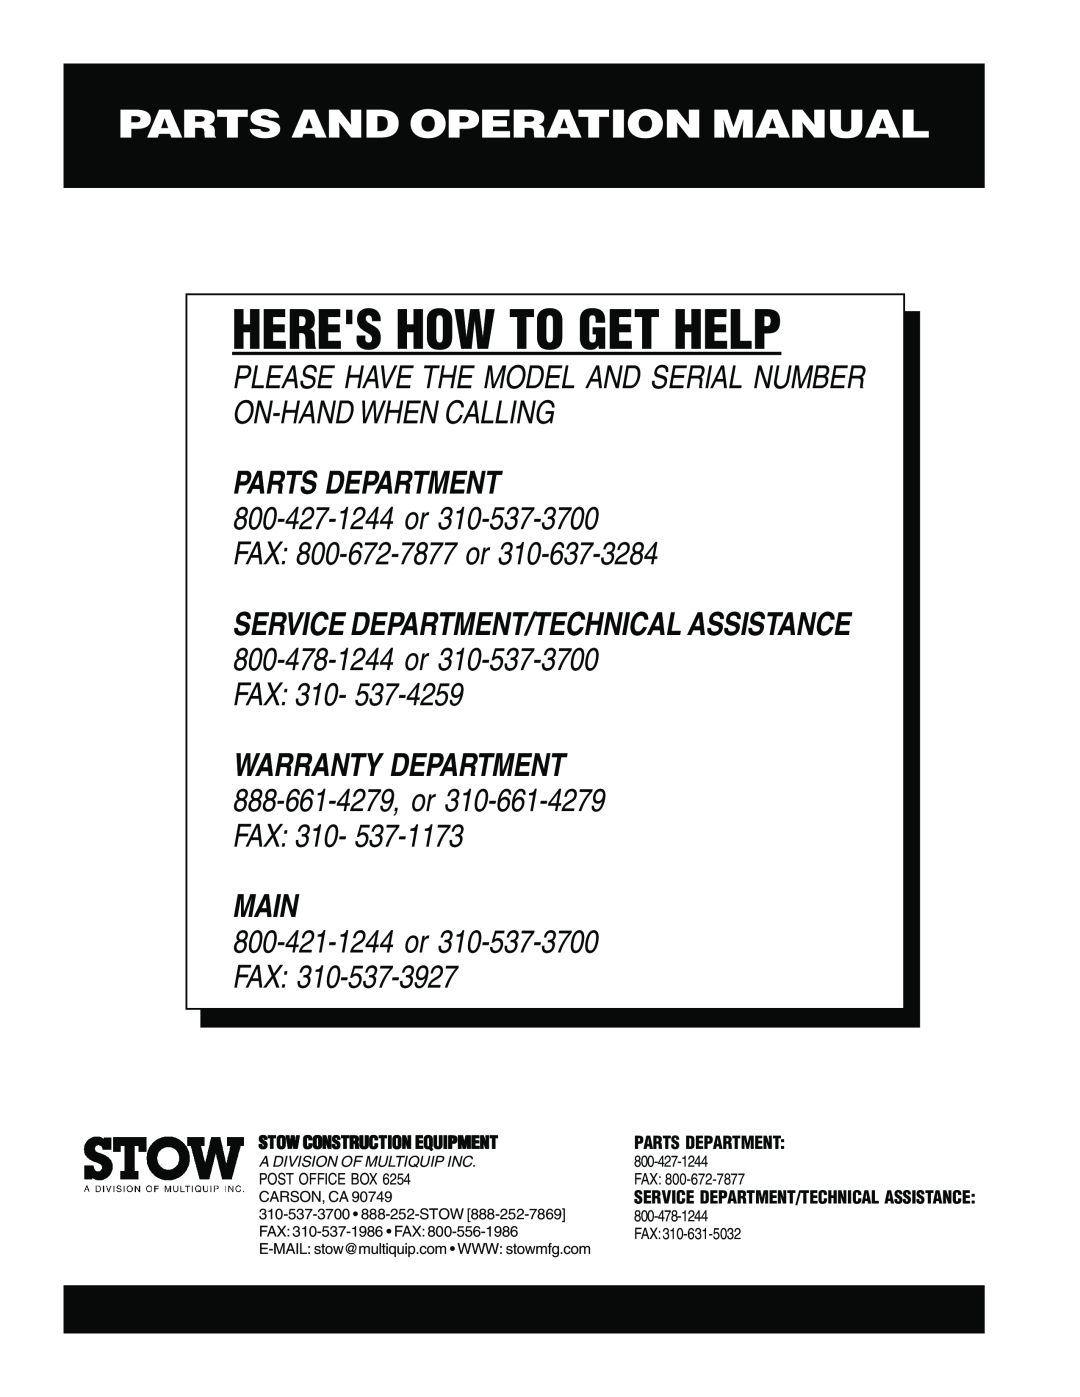 Stow 2100 Heres How To Get Help, Parts And Operation Manual, Please Have The Model And Serial Number On-Hand When Calling 